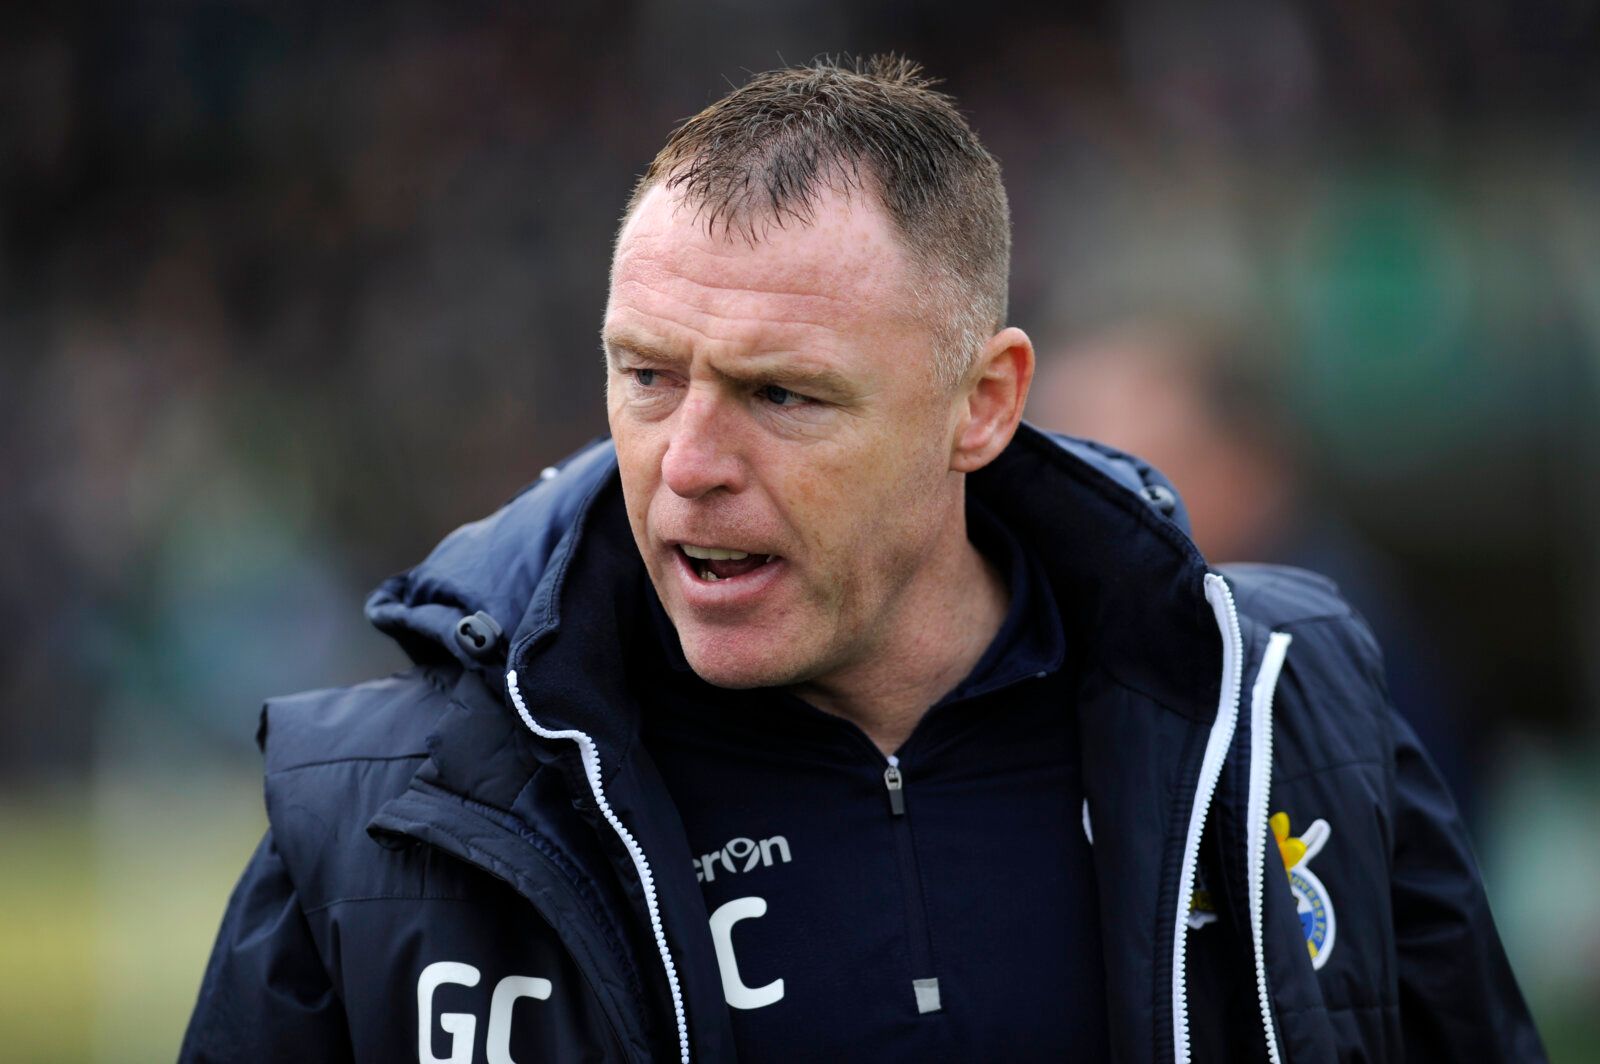 PLYMOUTH, ENGLAND - MARCH 23: Graham Coughlan, Manager of Bristol Rovers looks on prior to the Sky Bet League One match between Plymouth Argyle and Bristol Rovers at Home Park on March 23, 2019 in Plymouth, United Kingdom. (Photo by Alex Burstow/Getty Images)